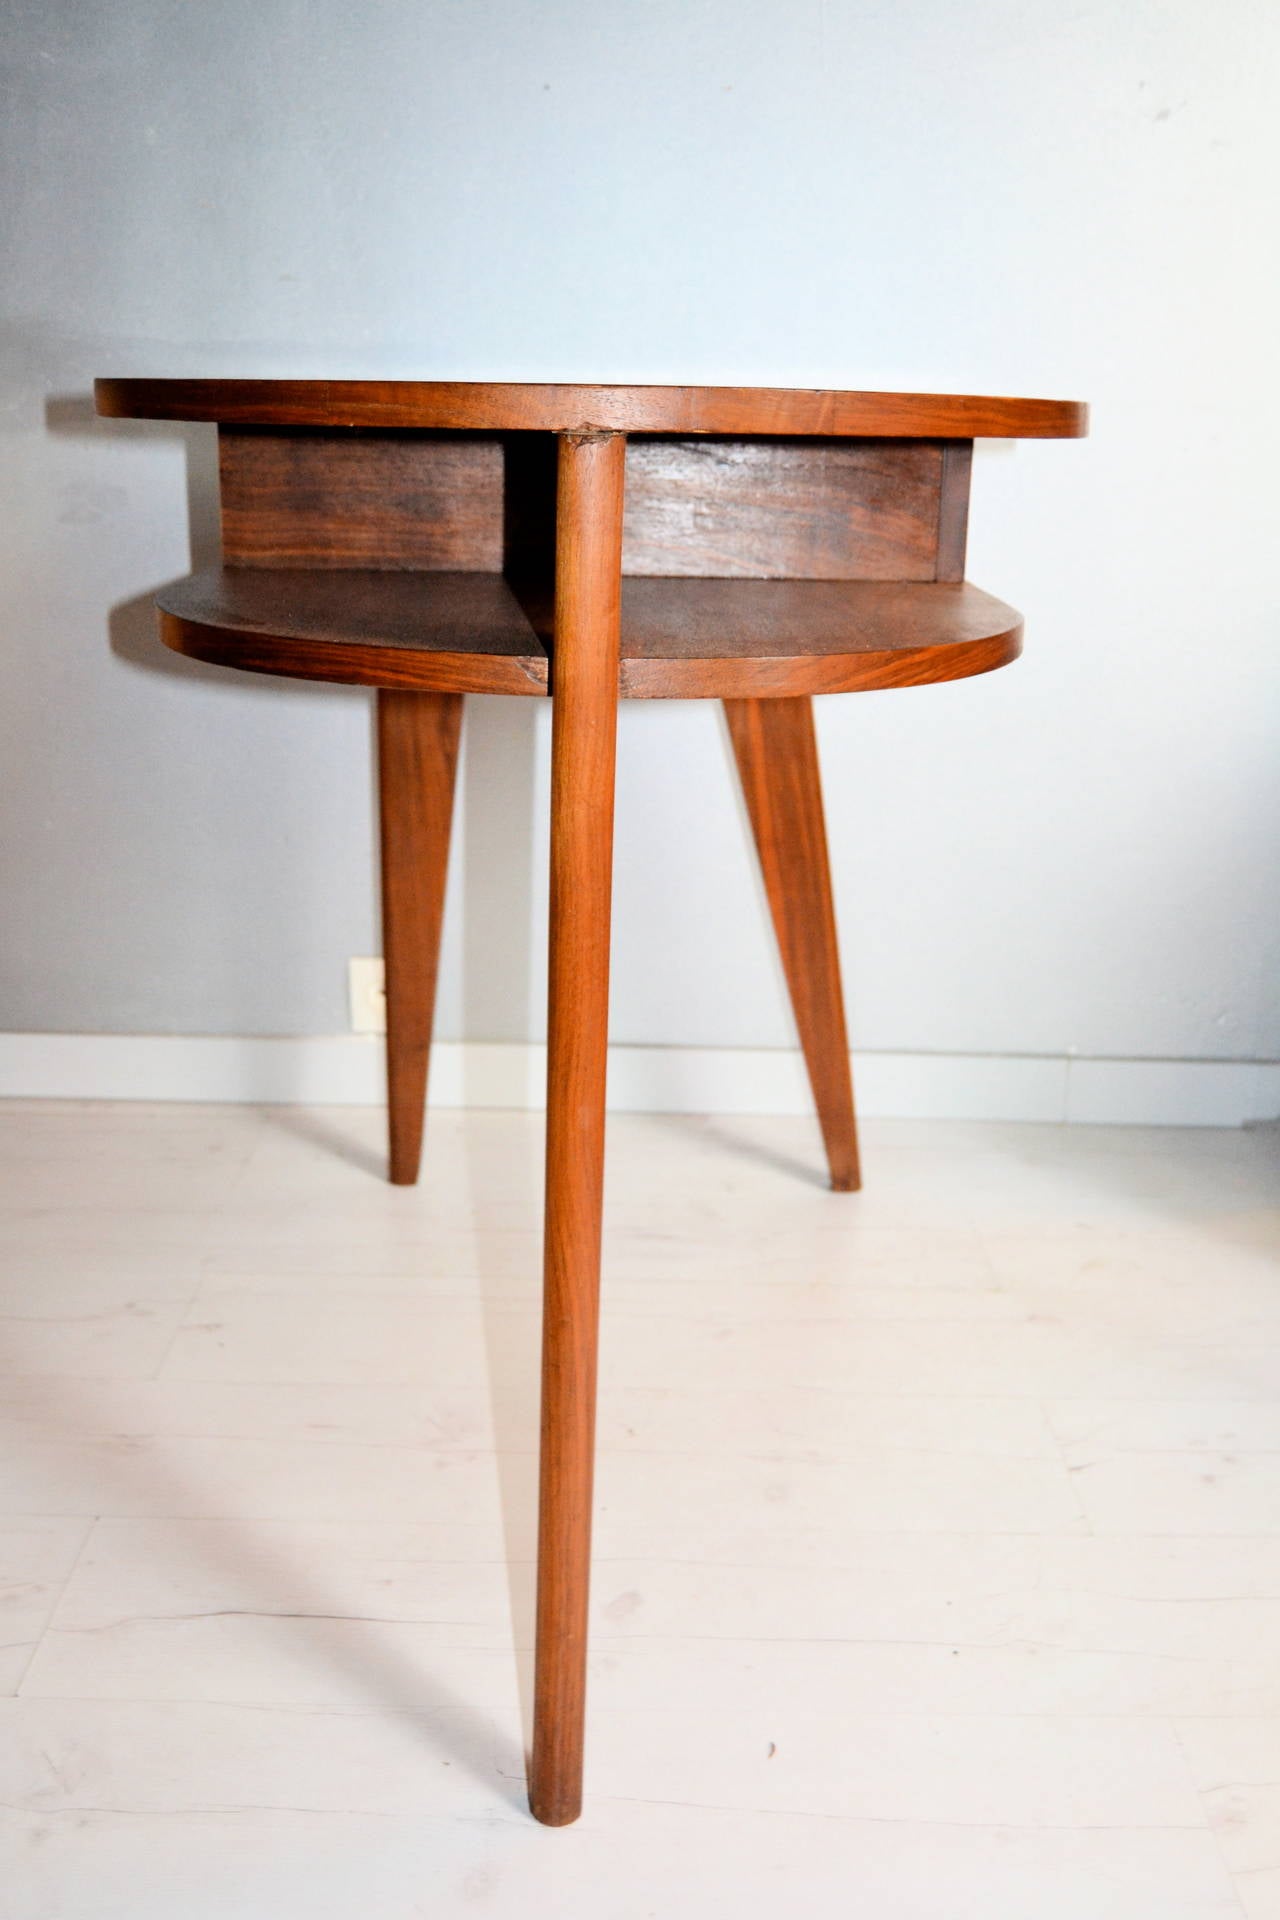 Late 1940s wood Jacques Adnet Desk with three legs design. Marqueterie top
one-drawer.